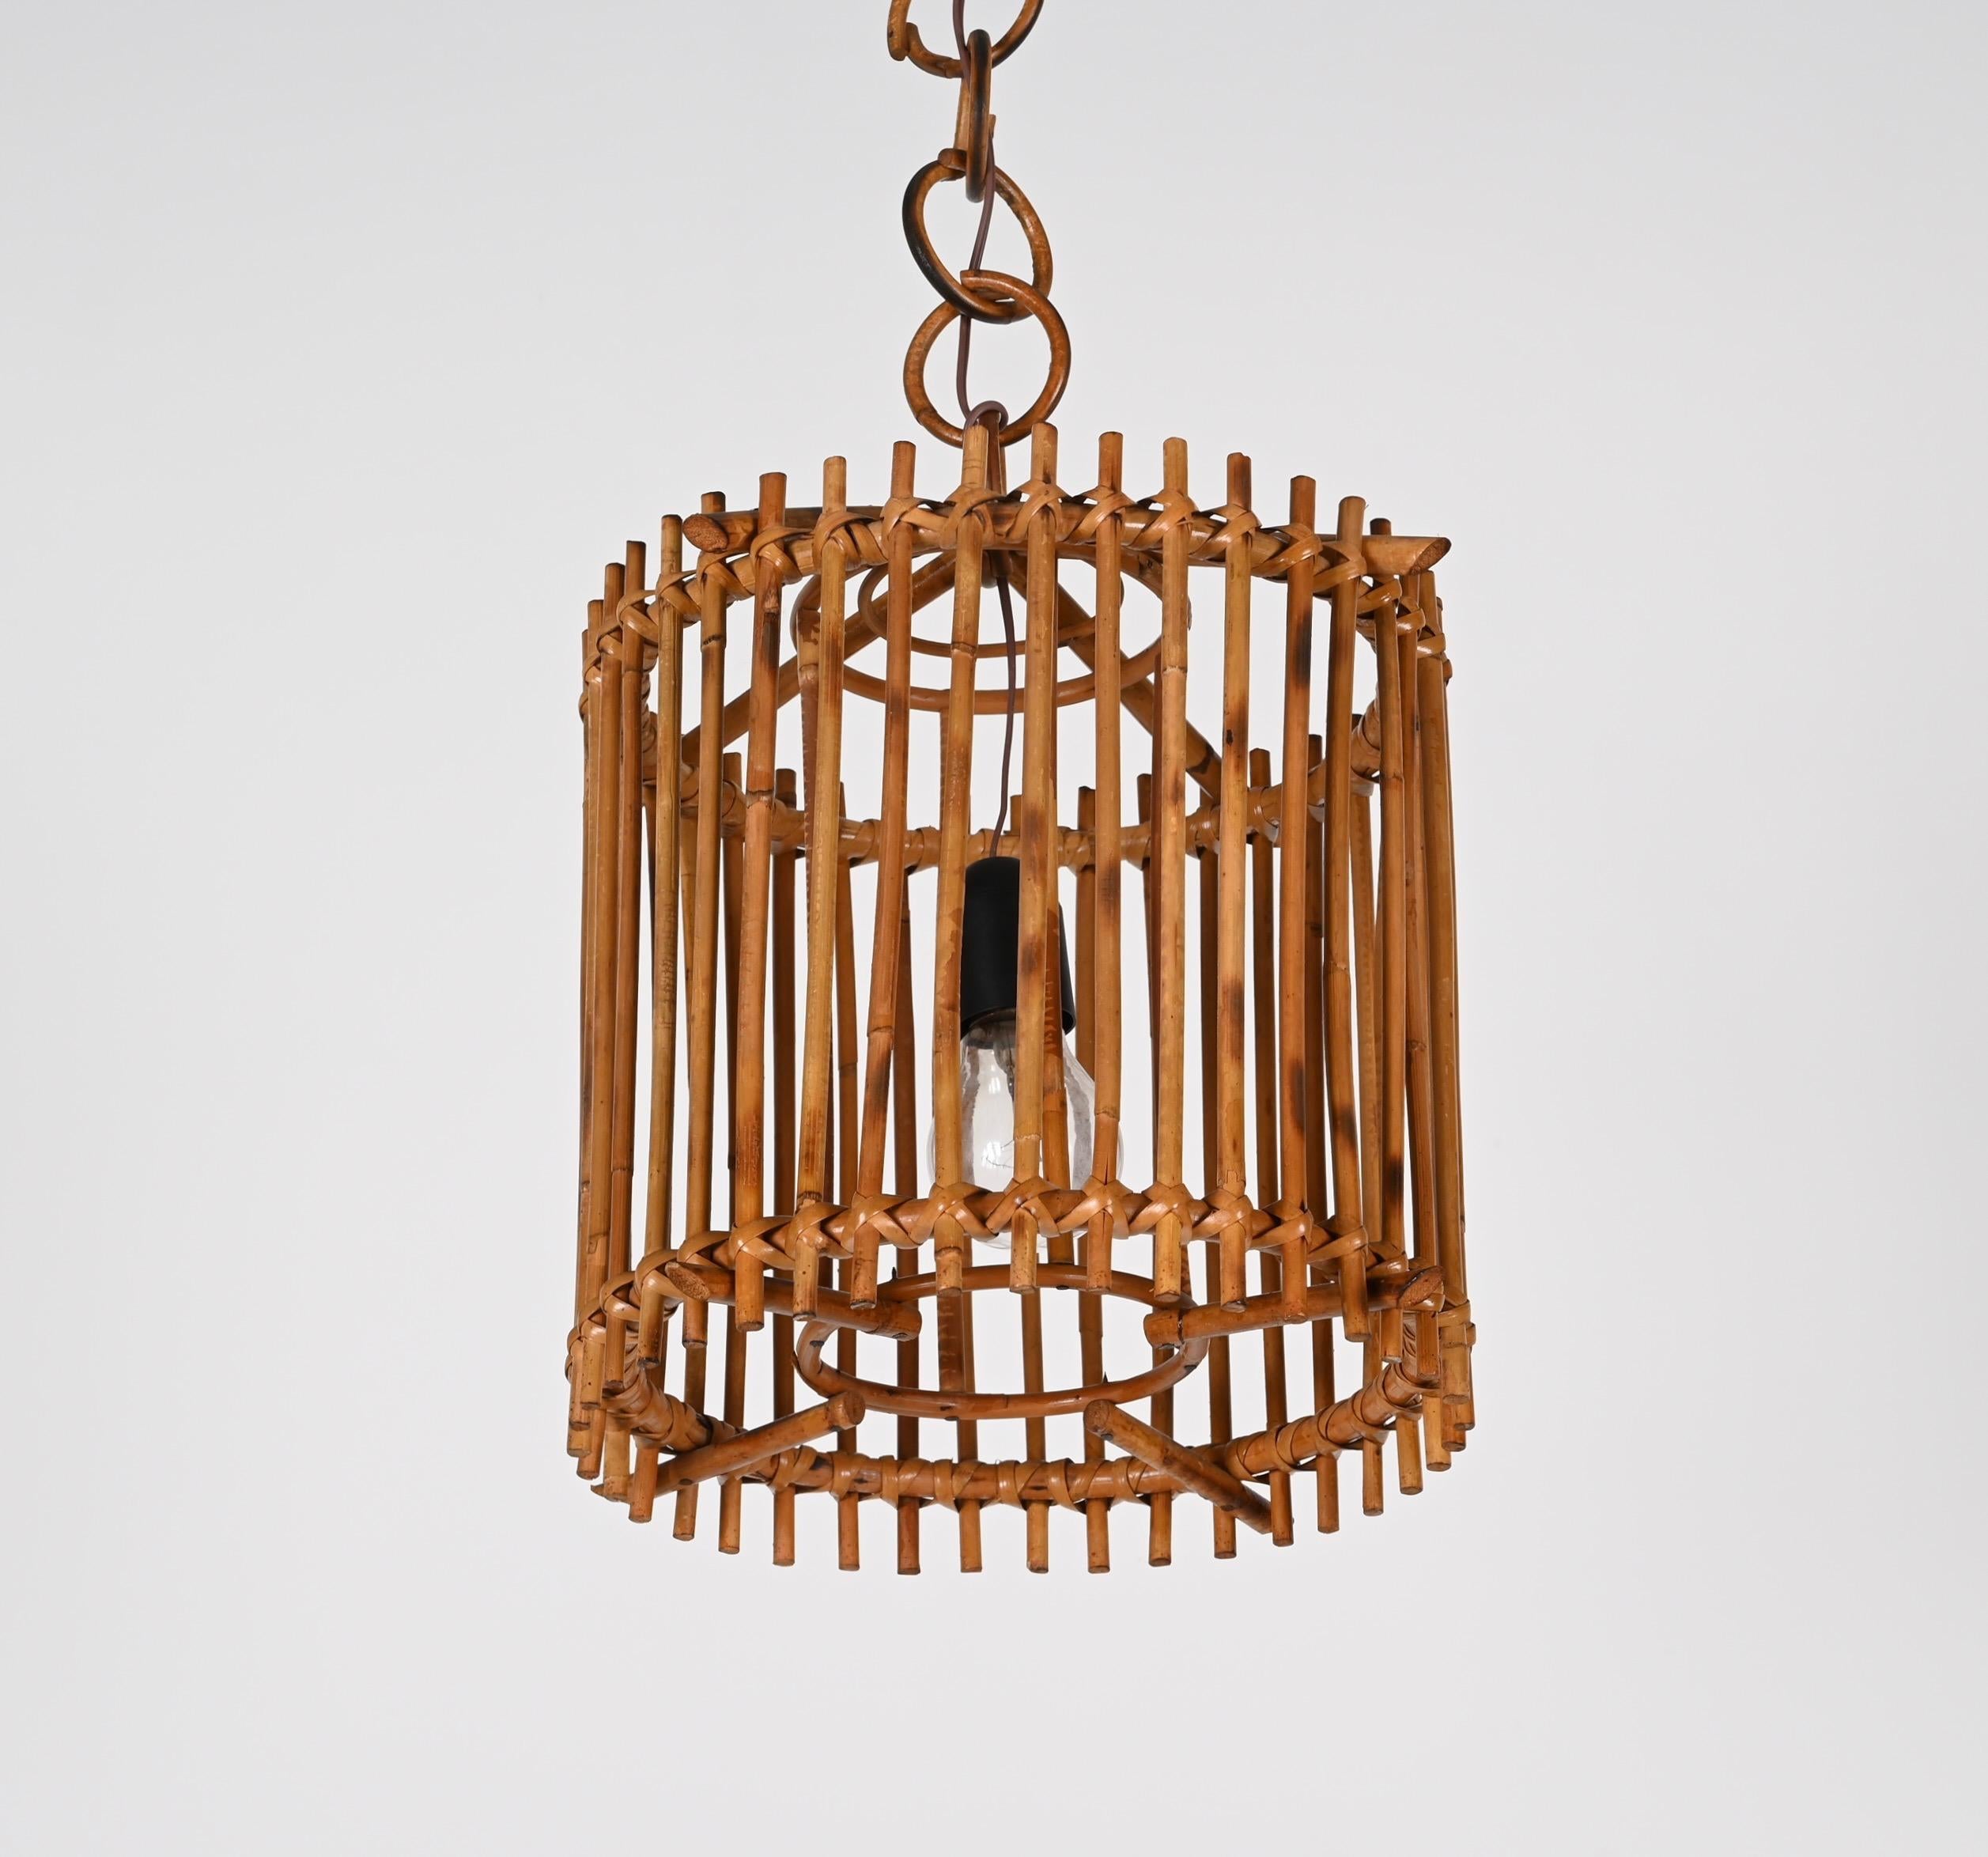 Amazing mid-century bamboo and rattan round chandelier. Louis Sognot probably designed this extraordinary in France during the 1960s.

An excellent example of mid-century craftsmanship, where bamboo and rattan are perfectly blended and shaped in a